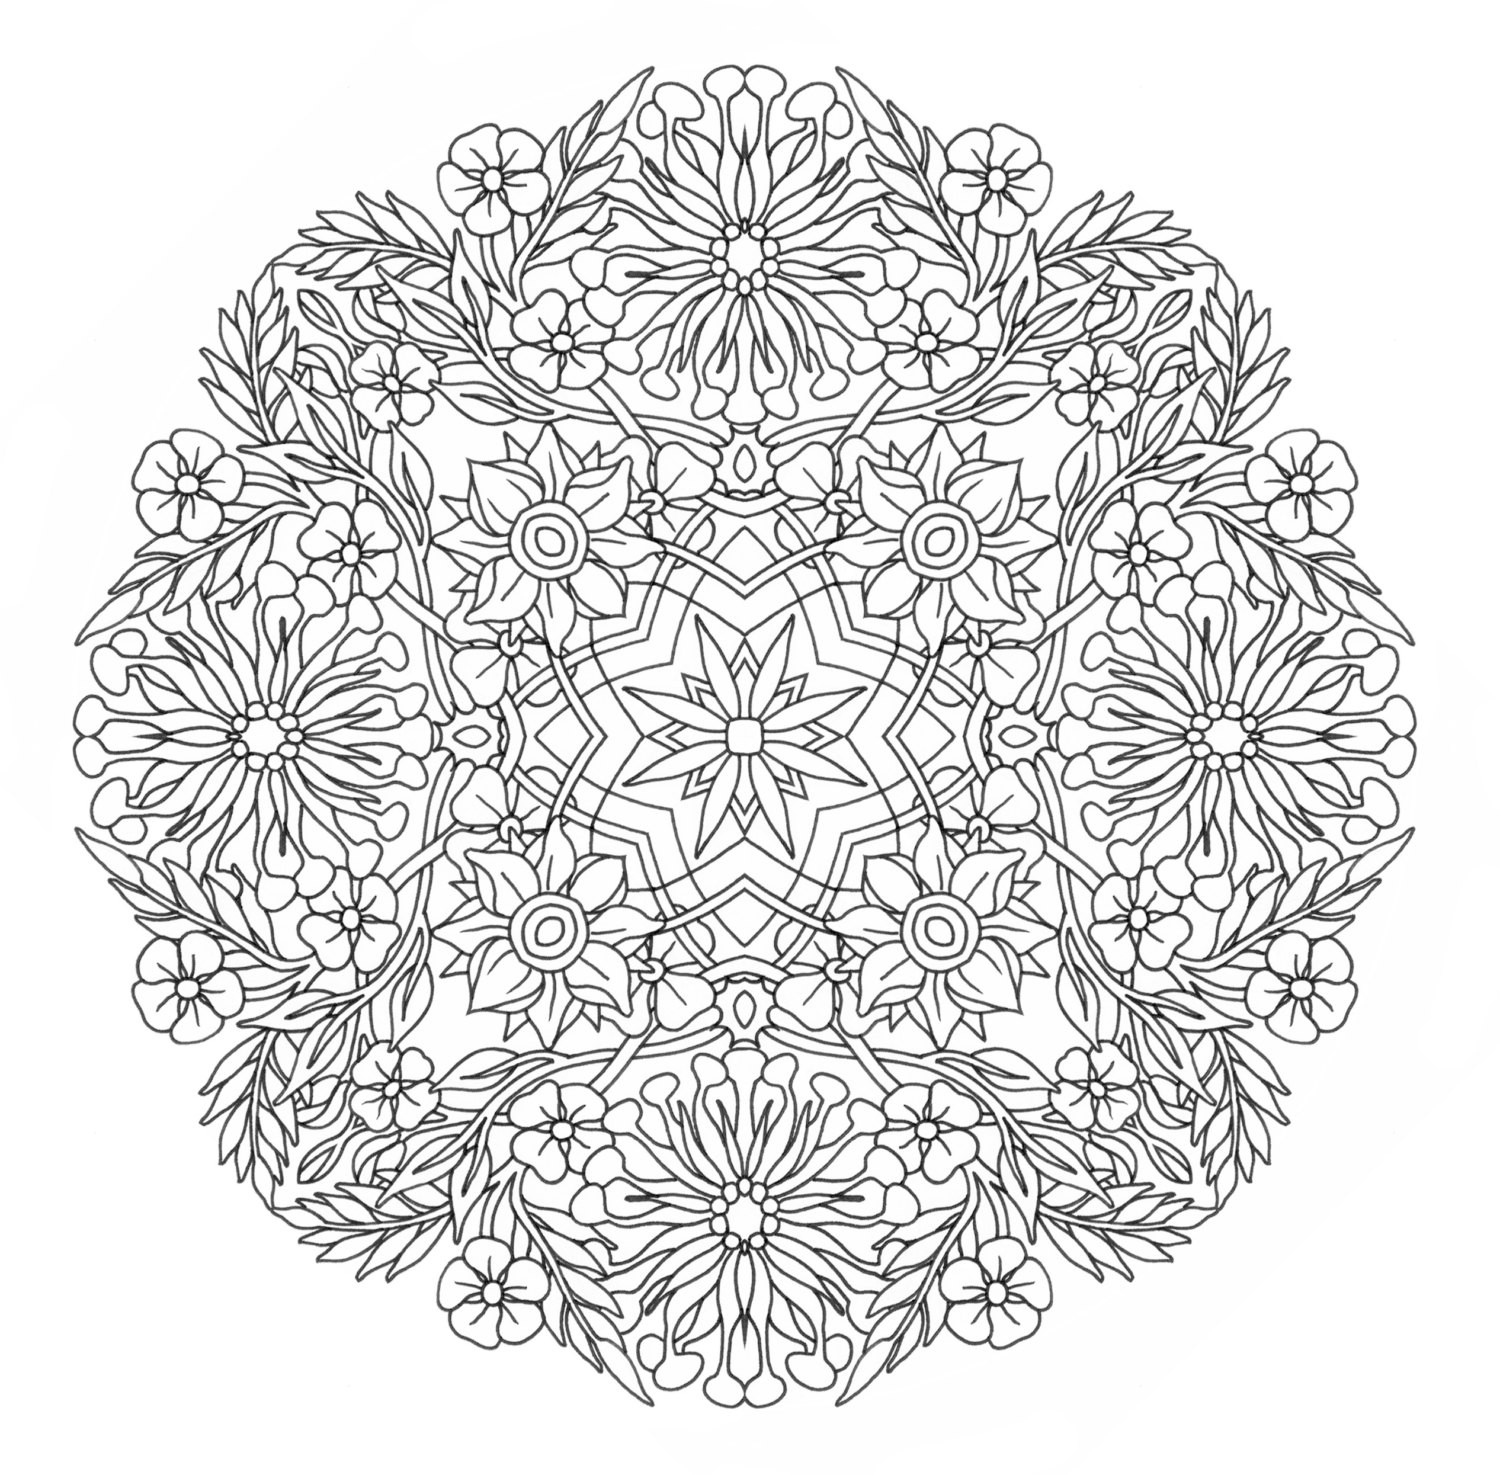 Coloring Pages For Adults Mandala
 Printable Coloring Page Honey Suckle Mandala by emerlyearts